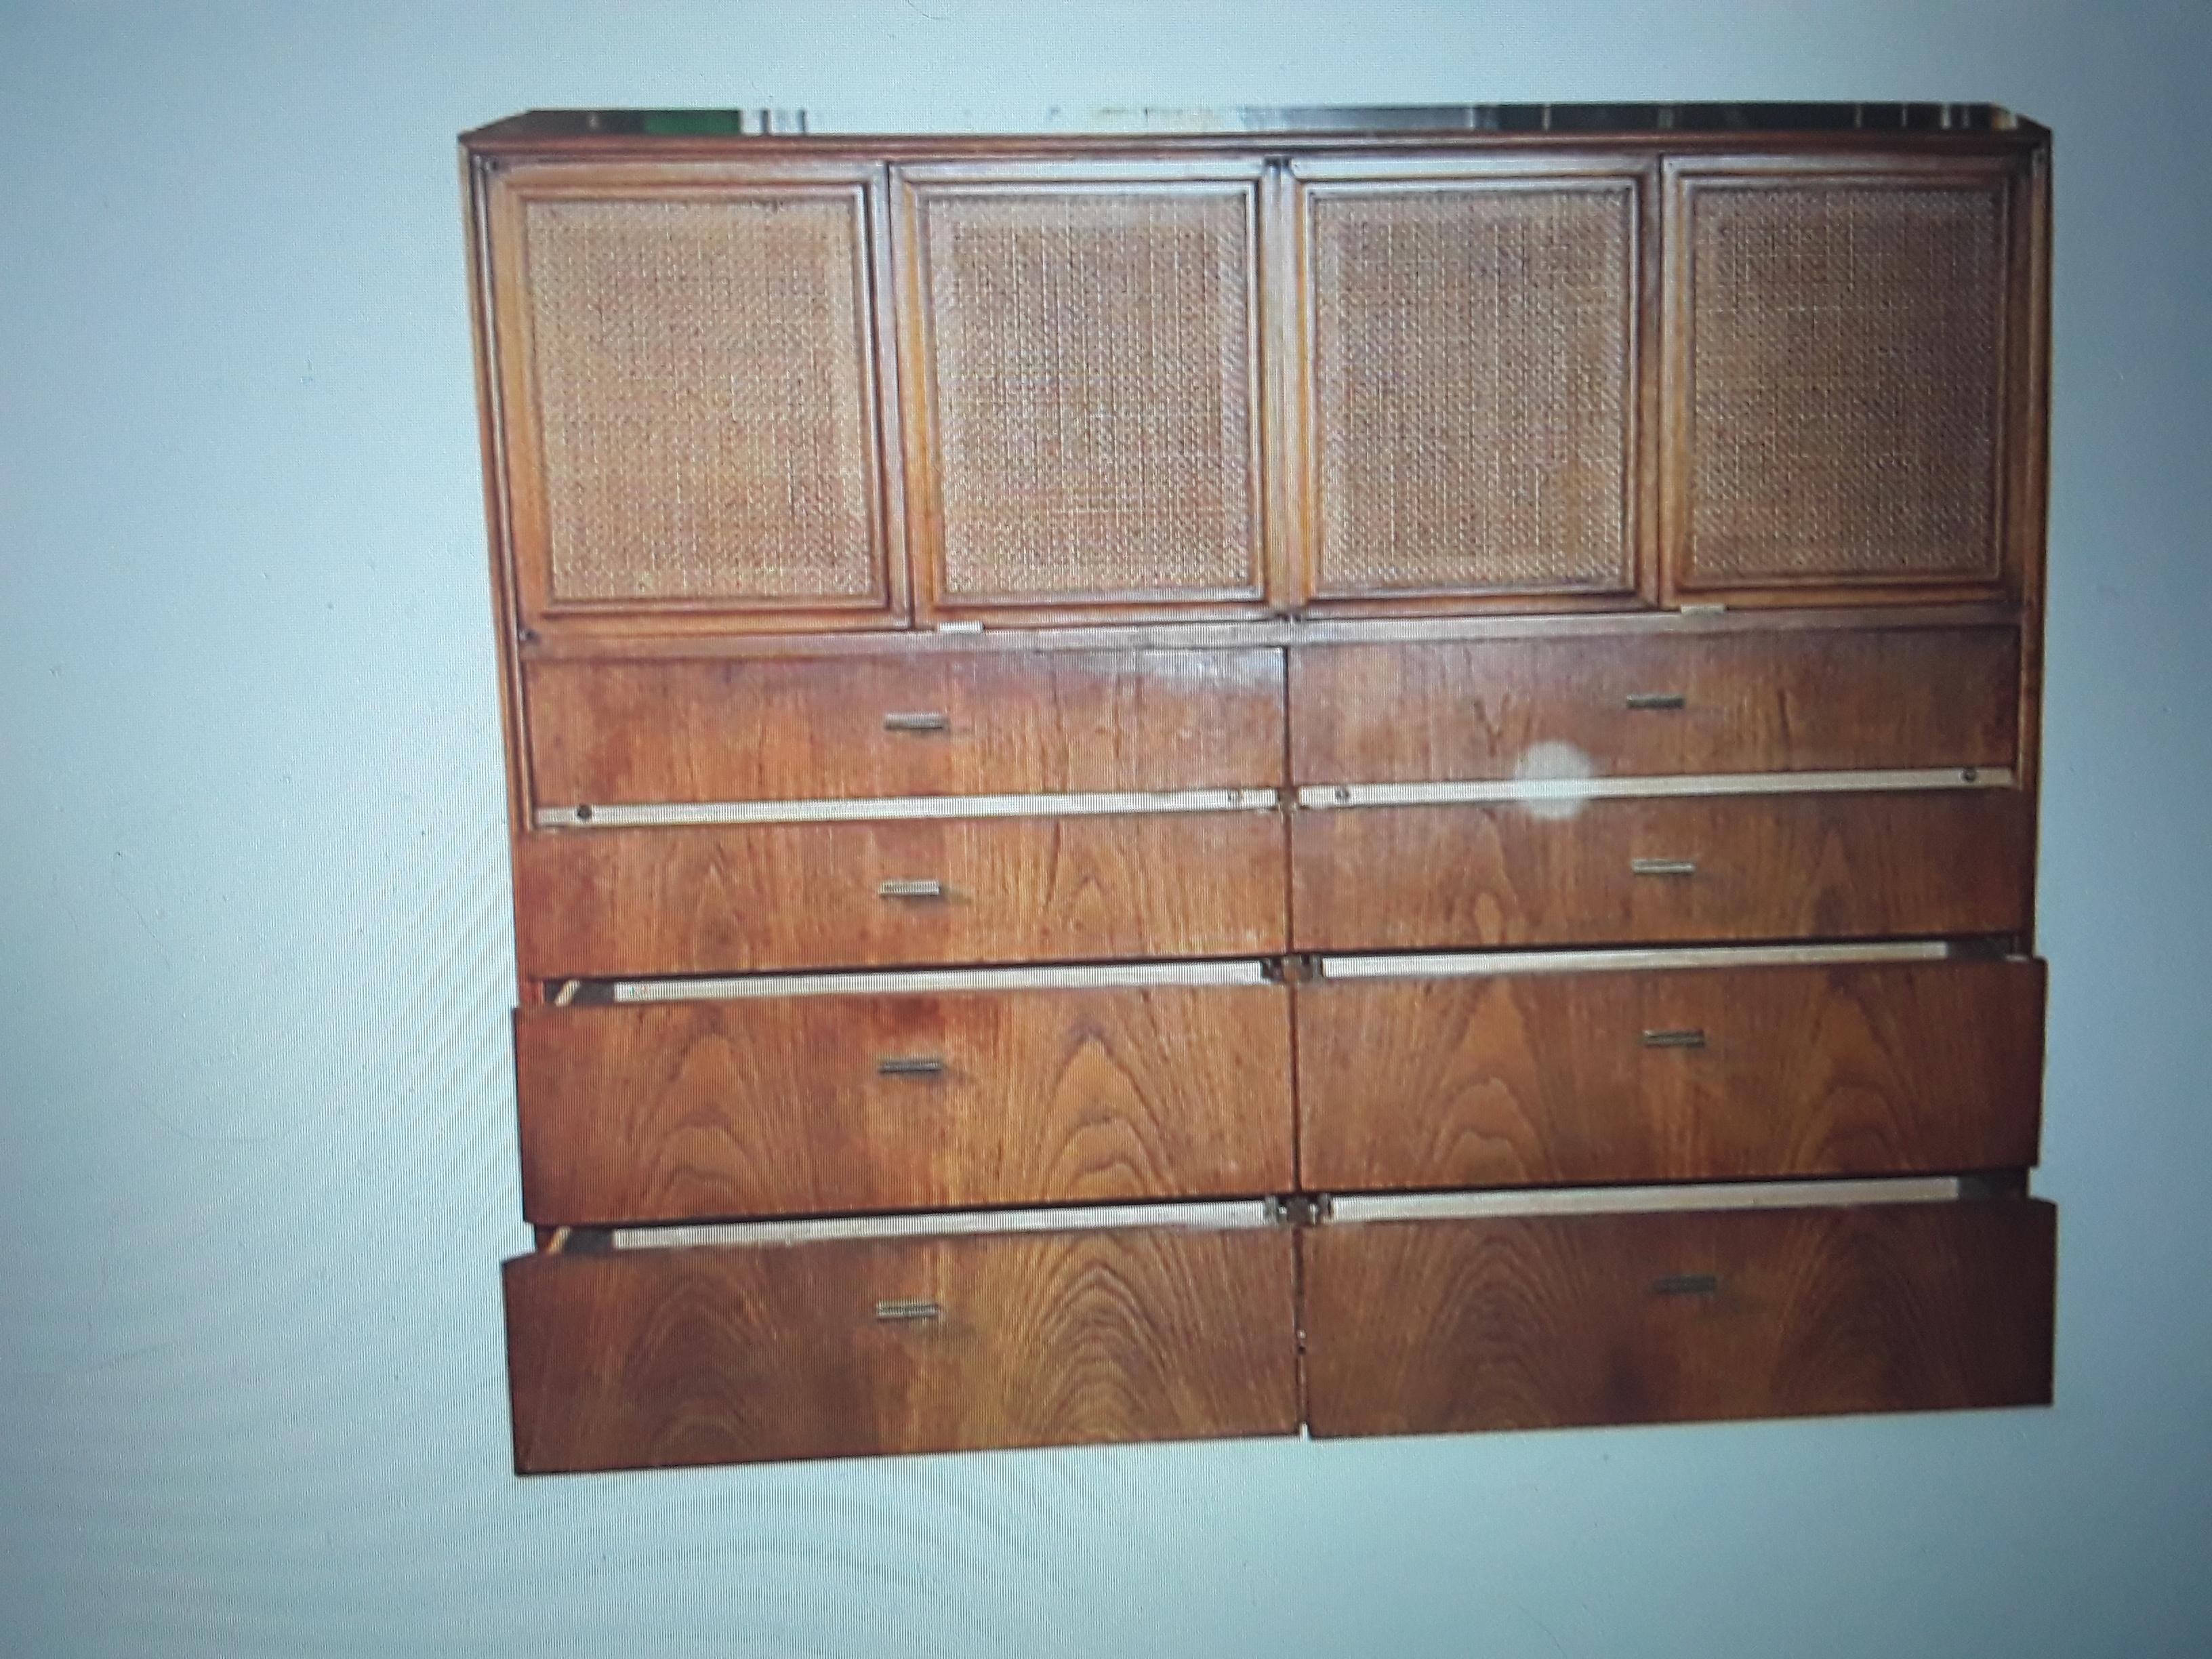 1960's MCM Chest of Drawers with 4 Cane Panelled Storage on Top. Great storage space. Cane in very good condition.